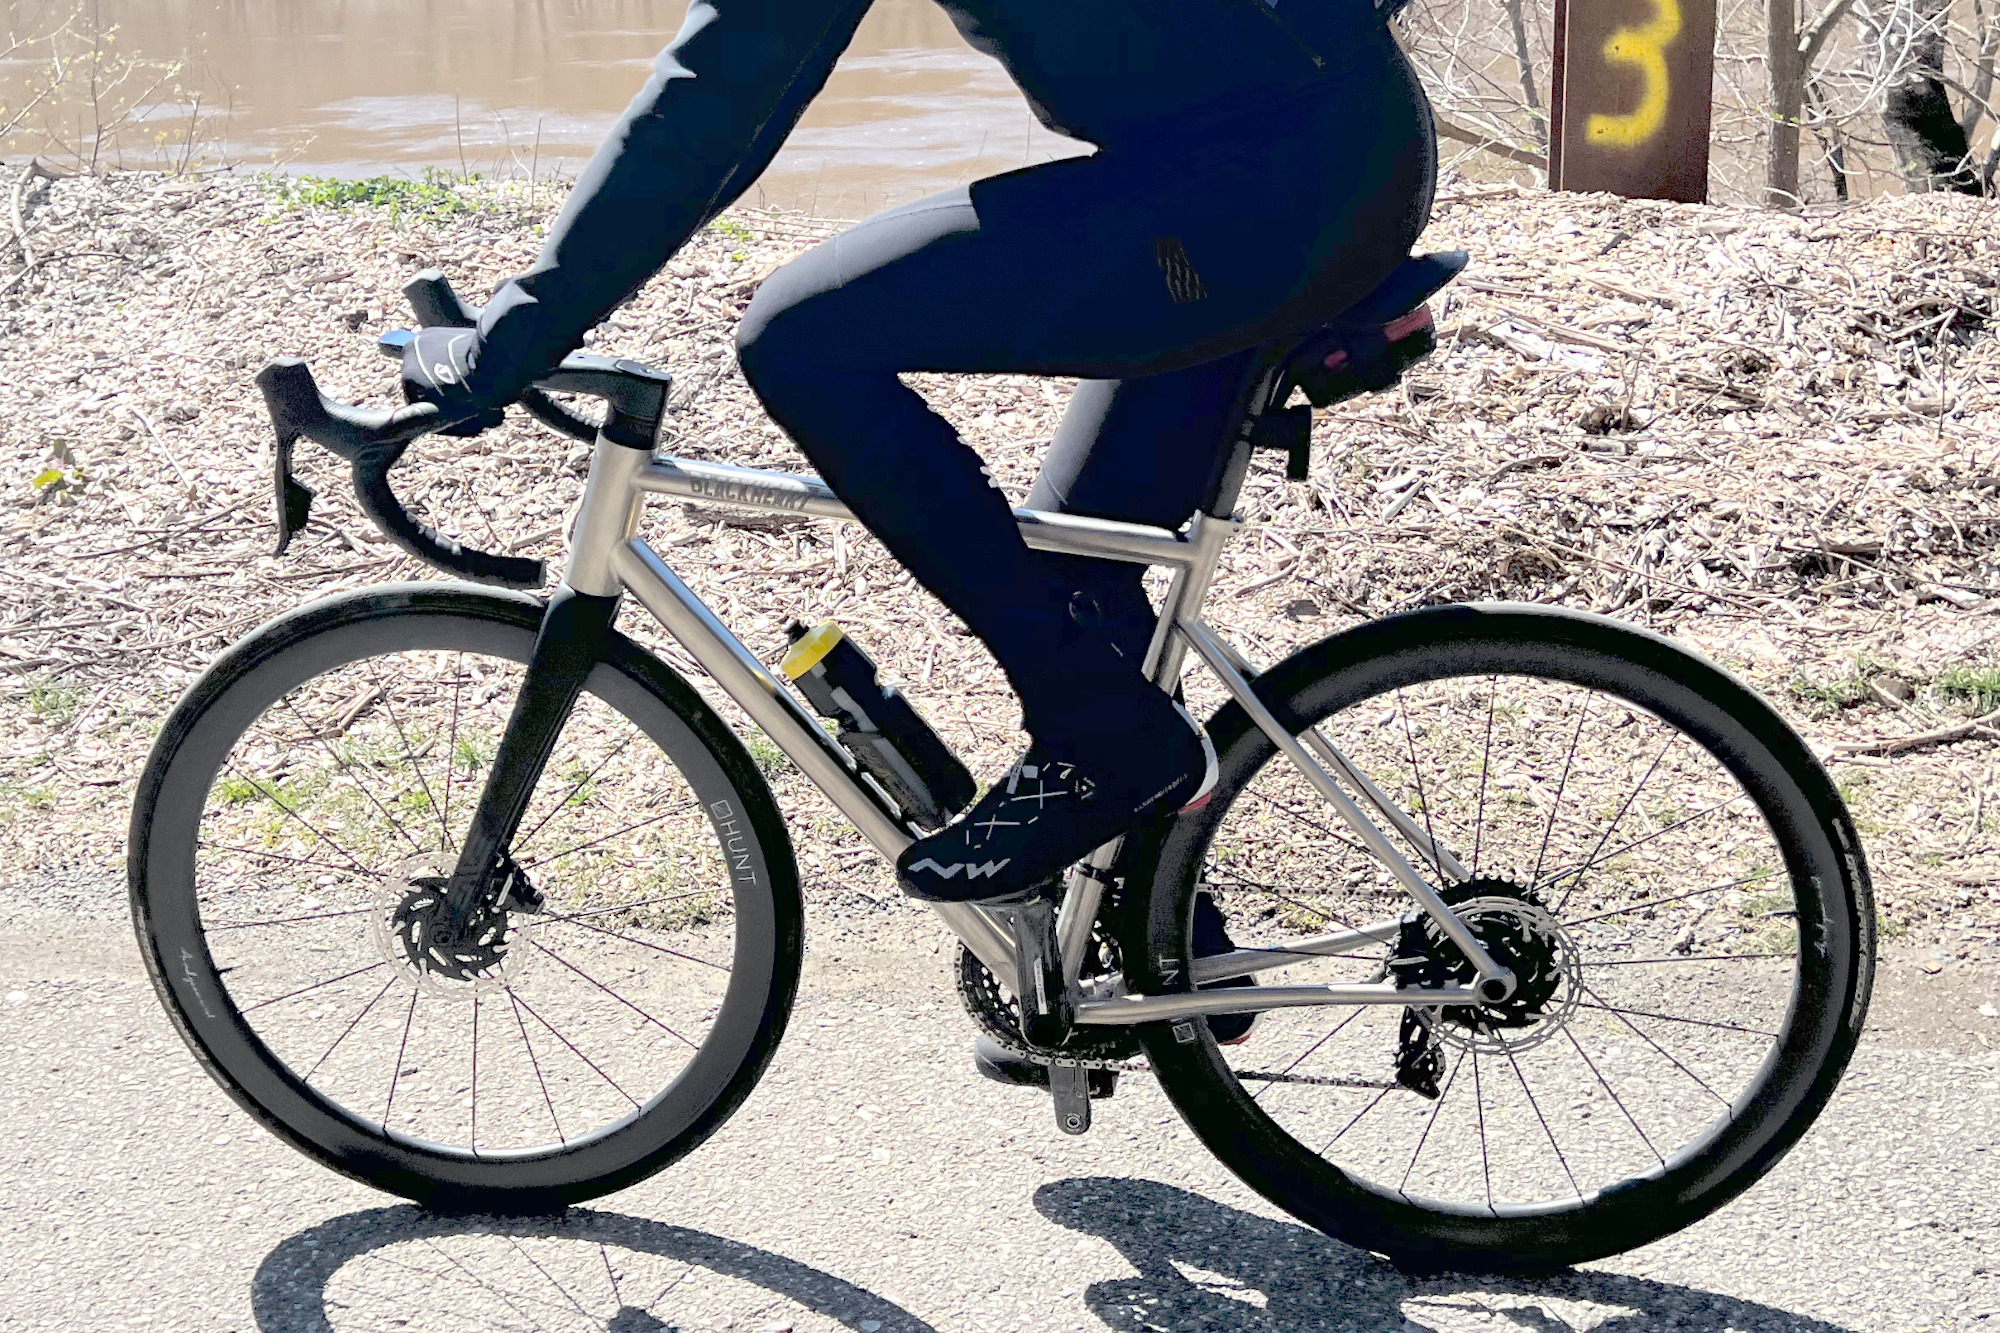 Blackheart Bike Co's Road Ti reviewed: Riding on smooth roads and multi-use paths, the Blackheart feels so smooth, while not isolating the rider or muting the ride.